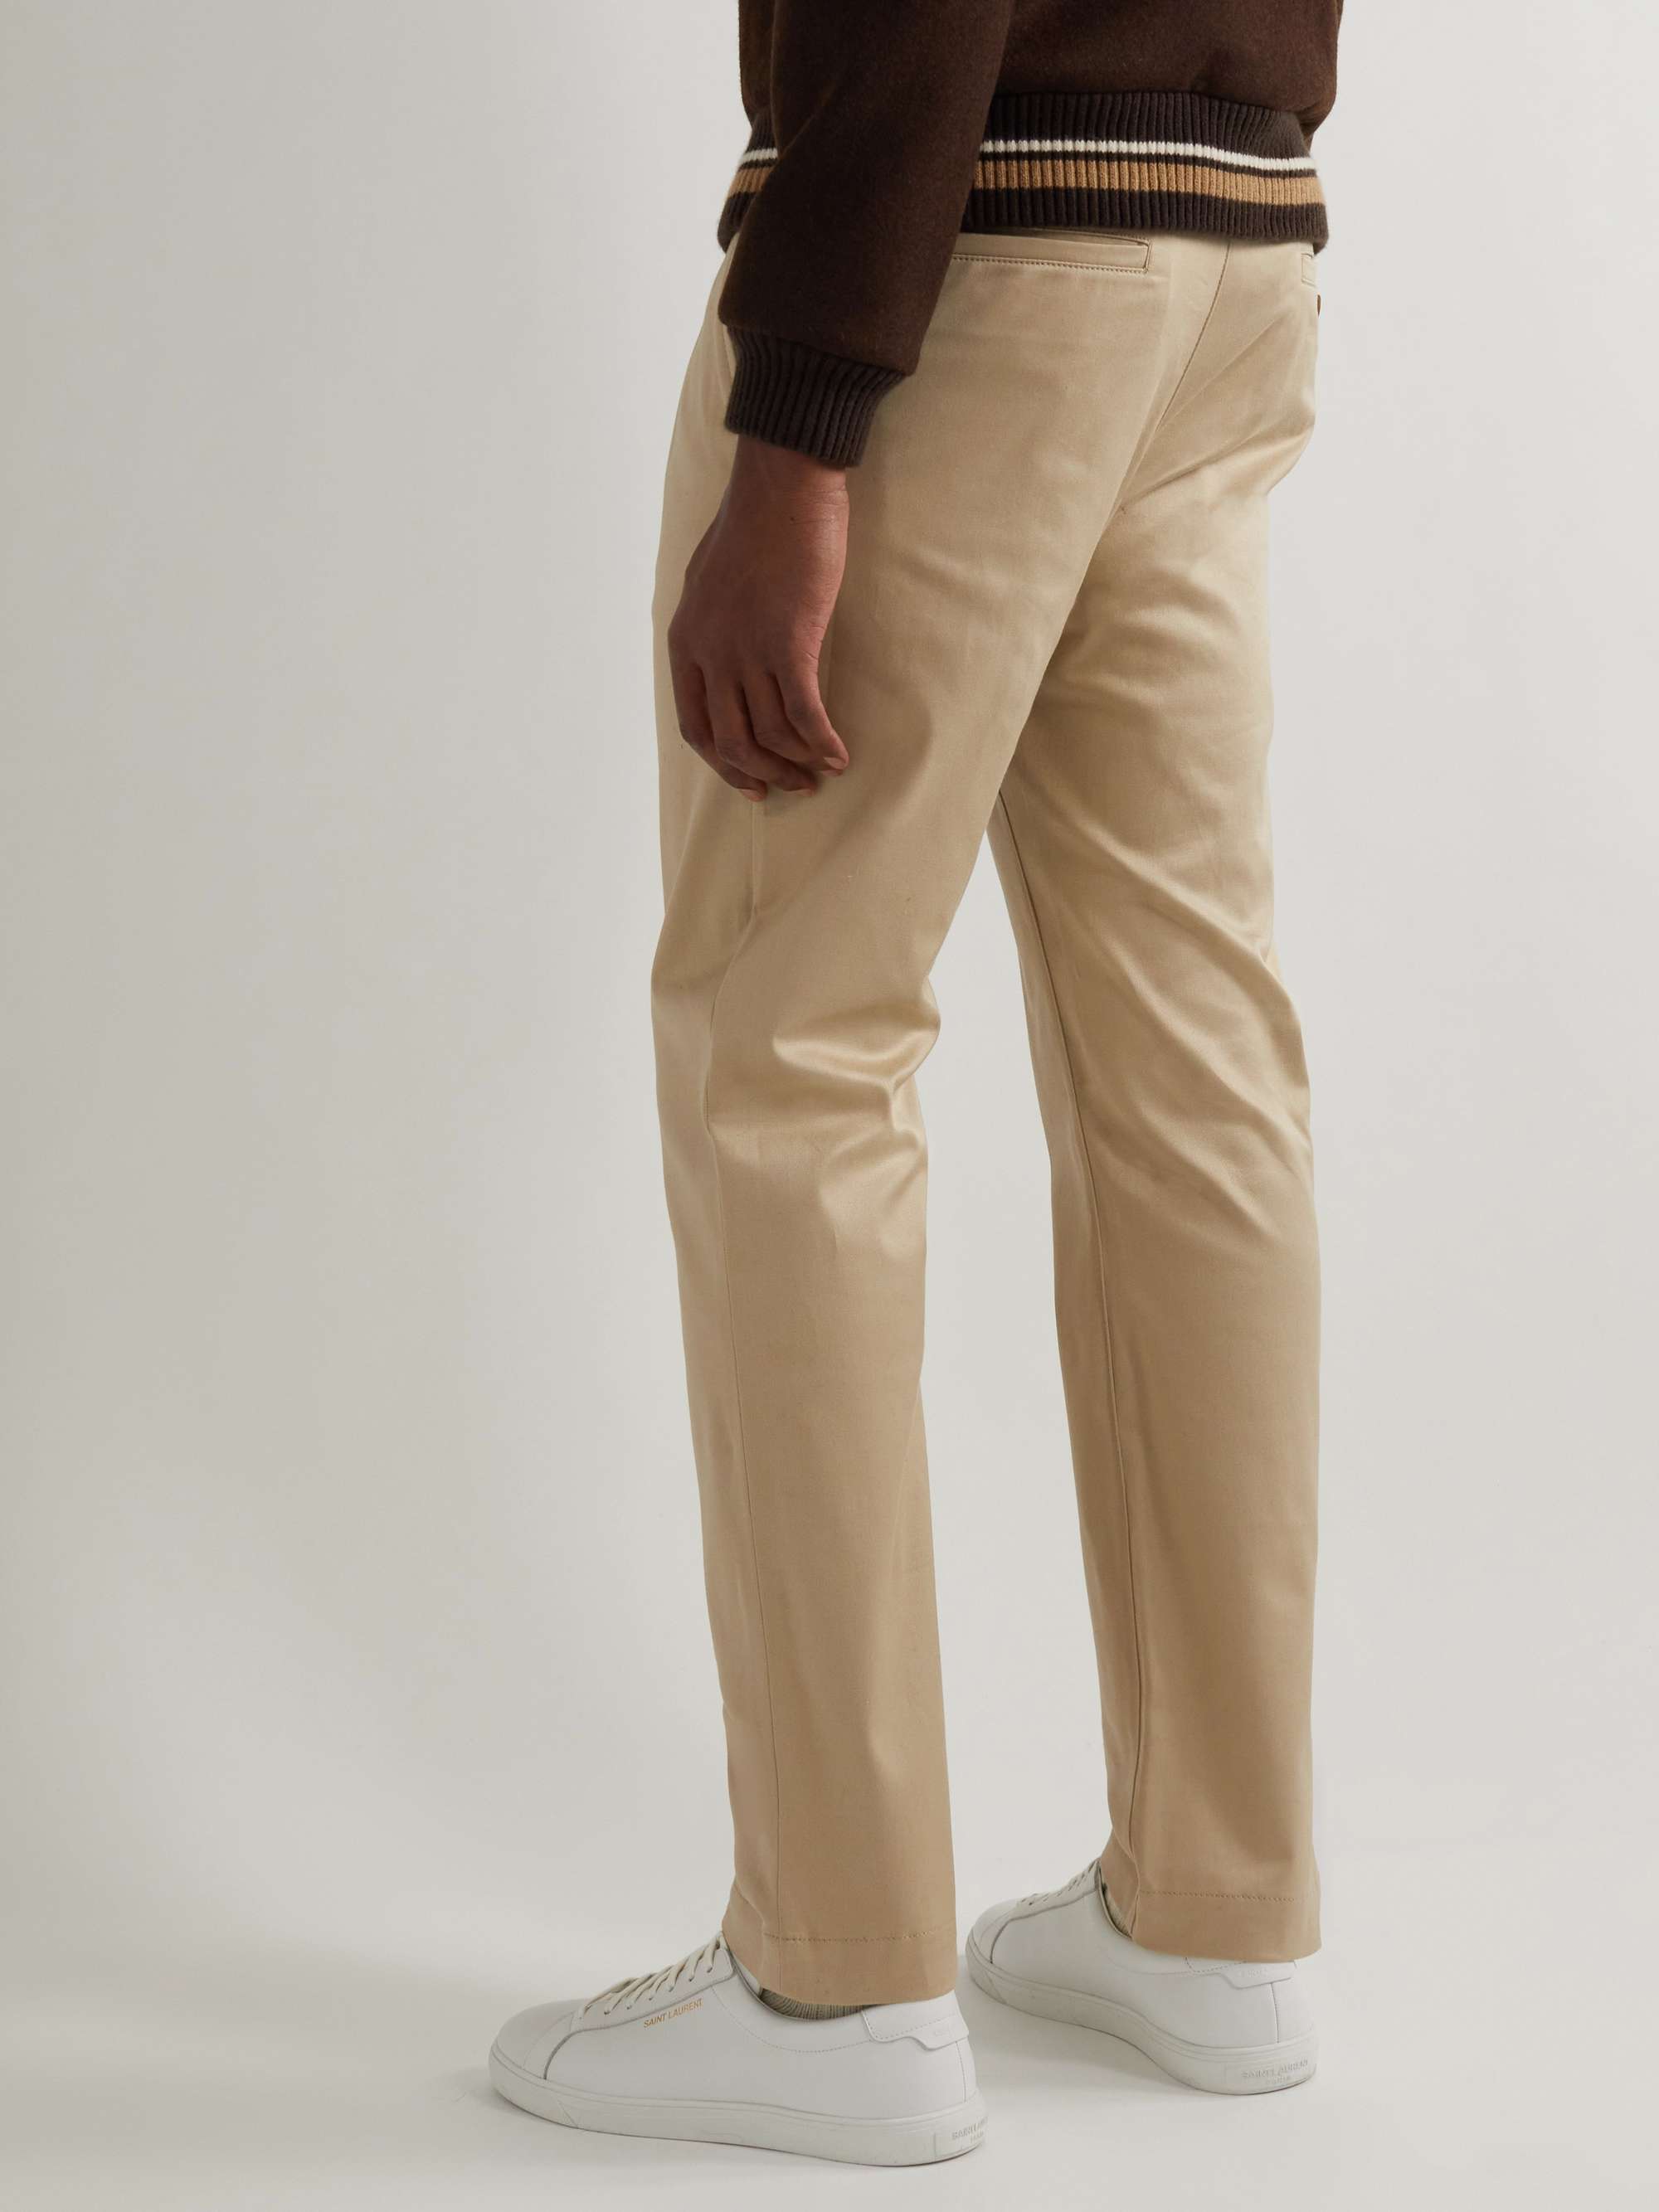 SAINT LAURENT Tapered Pleated Cotton-Blend Twill Chinos